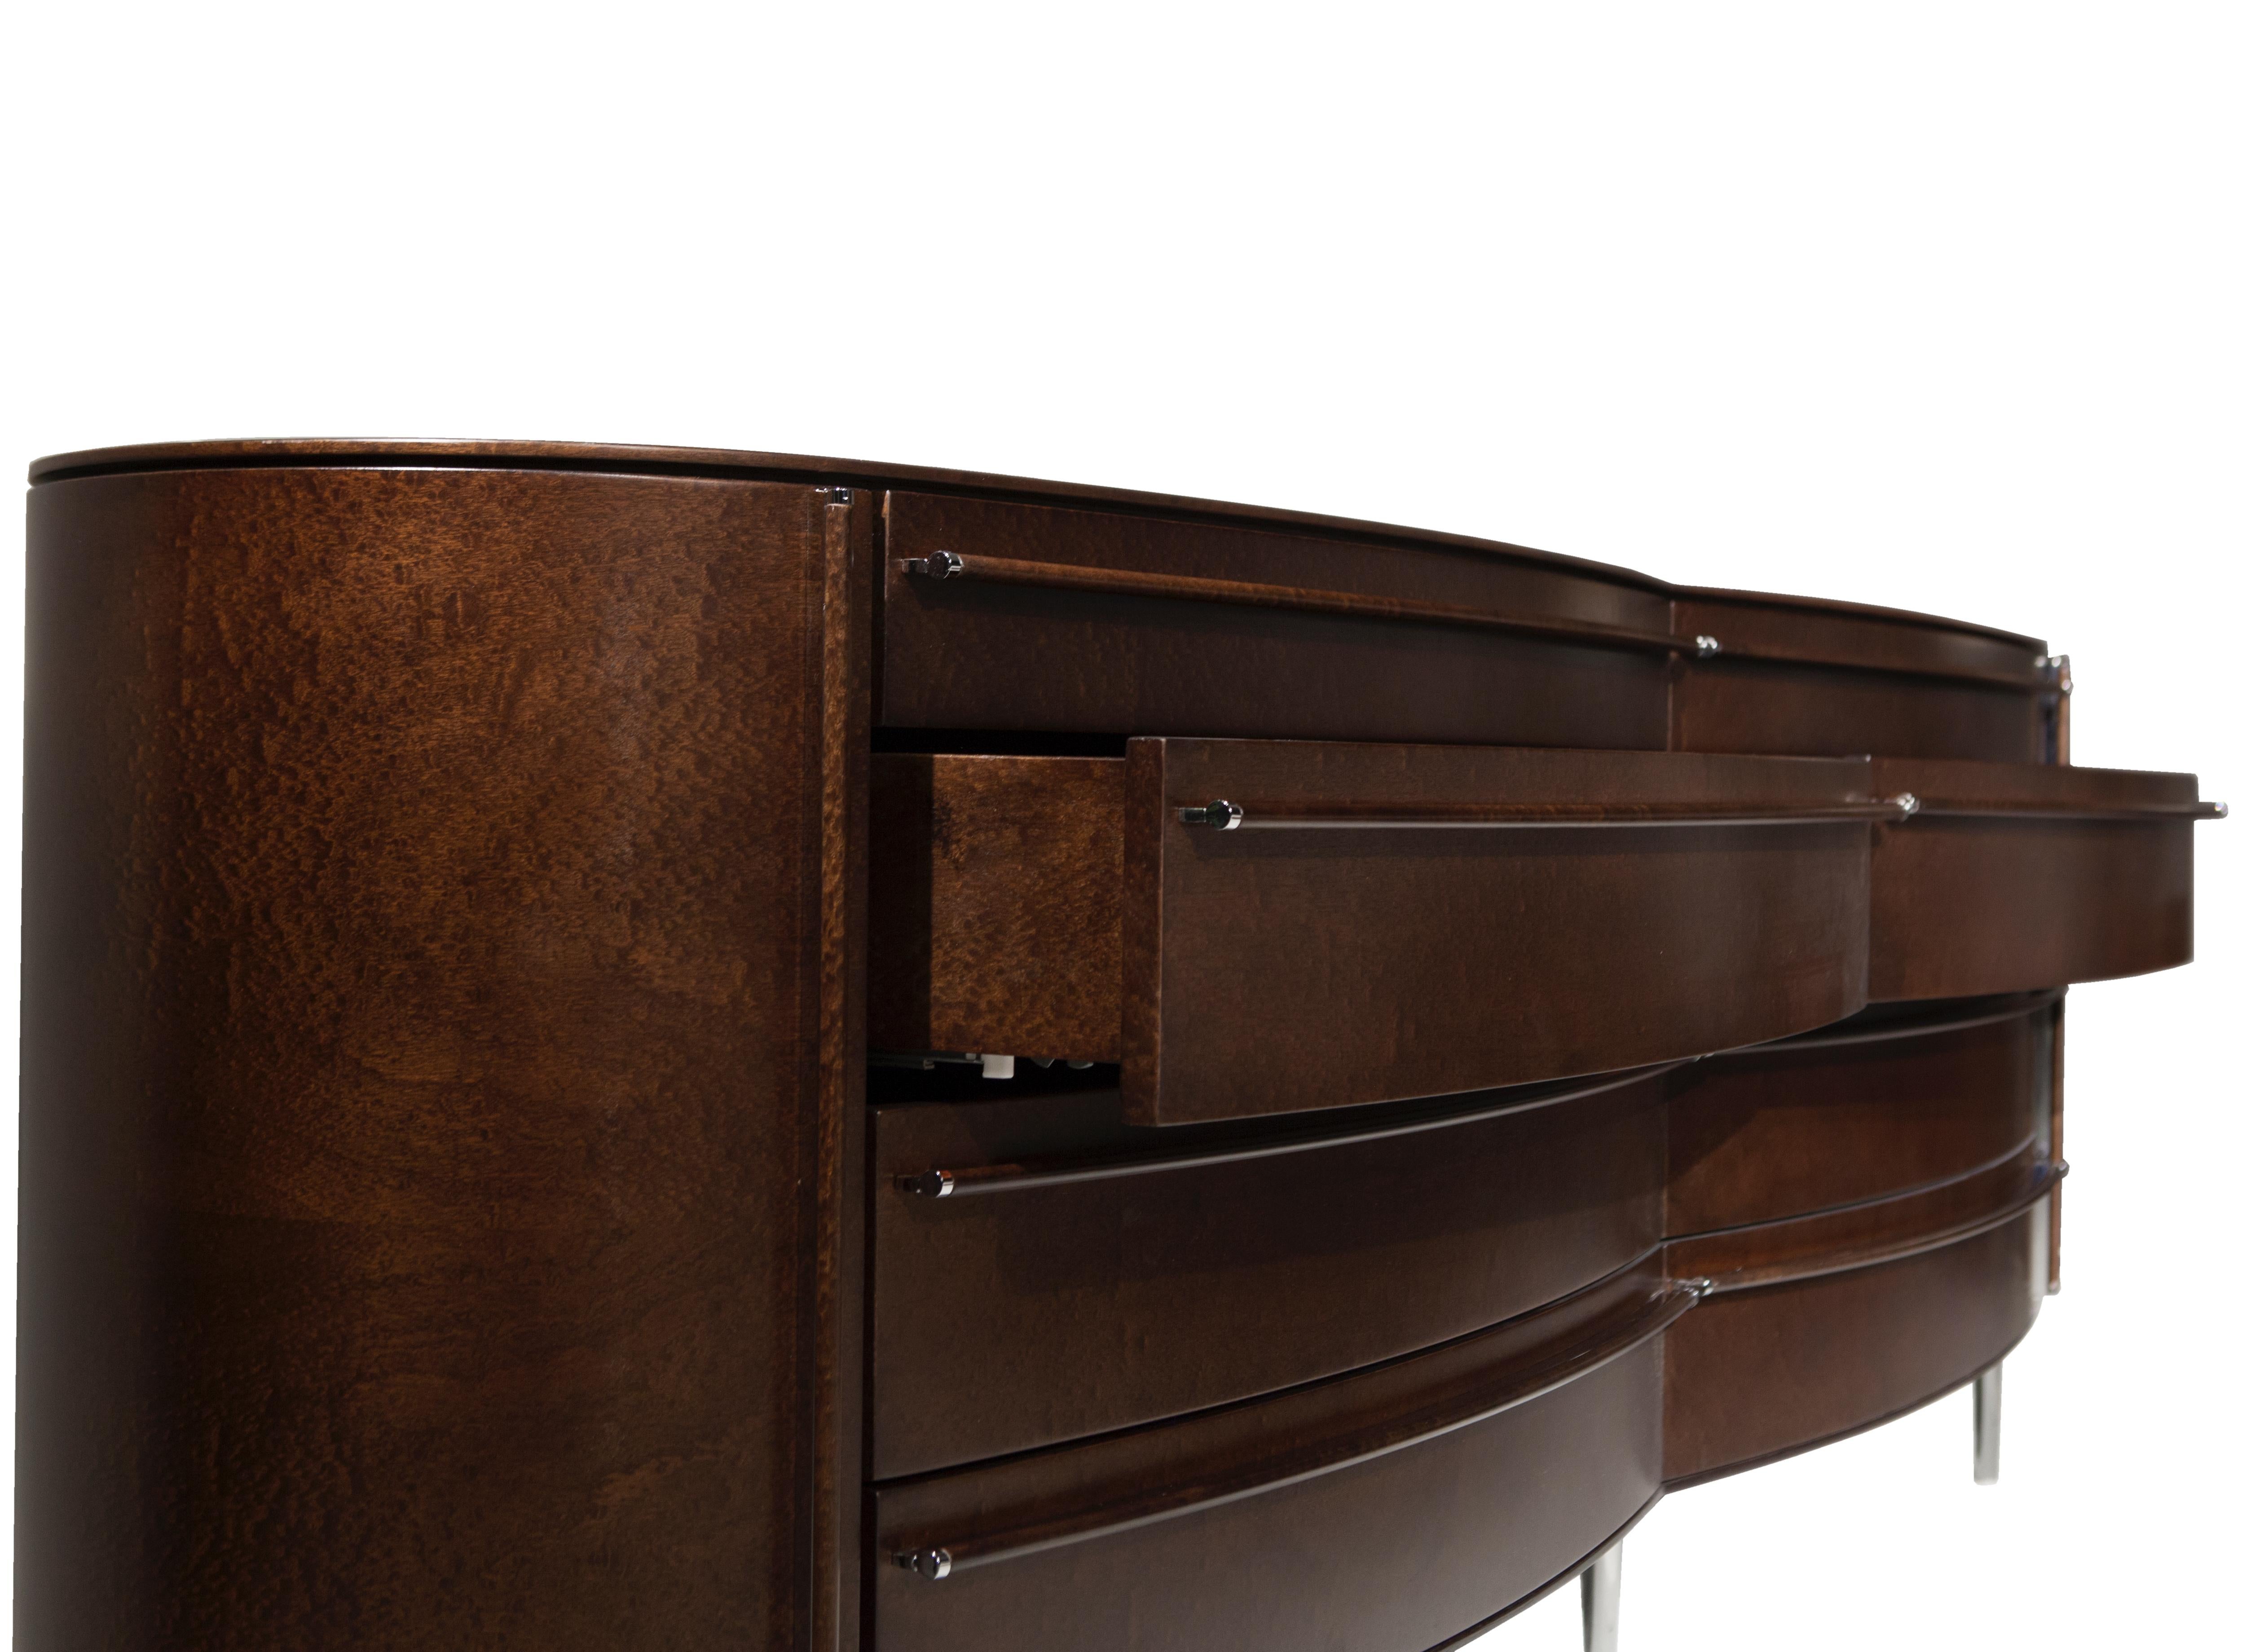 The Versa dresser’s slim and curved profile with 6 drawers is a timeless design atop sleek metal legs.